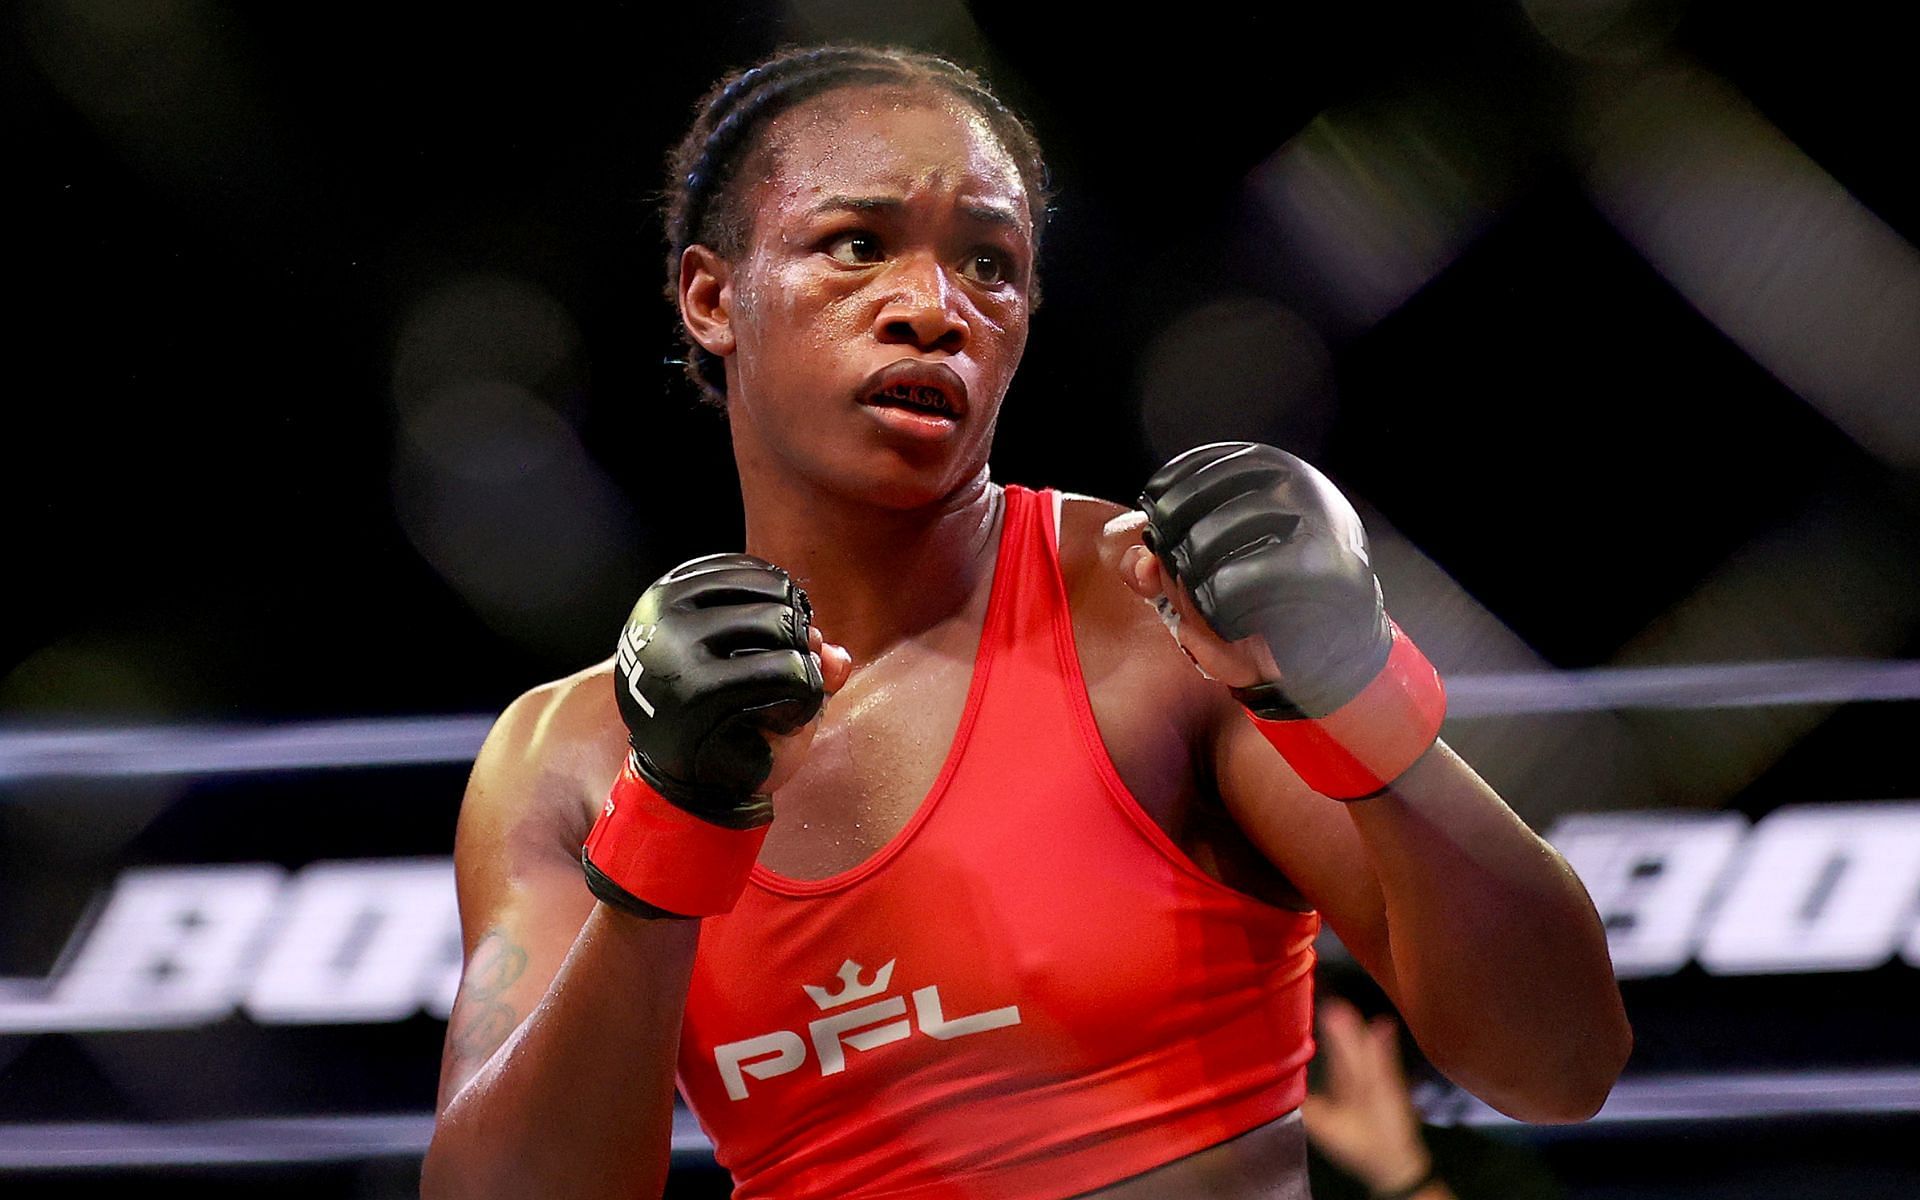 American boxer-turned-mixed martial artist Claressa Shields